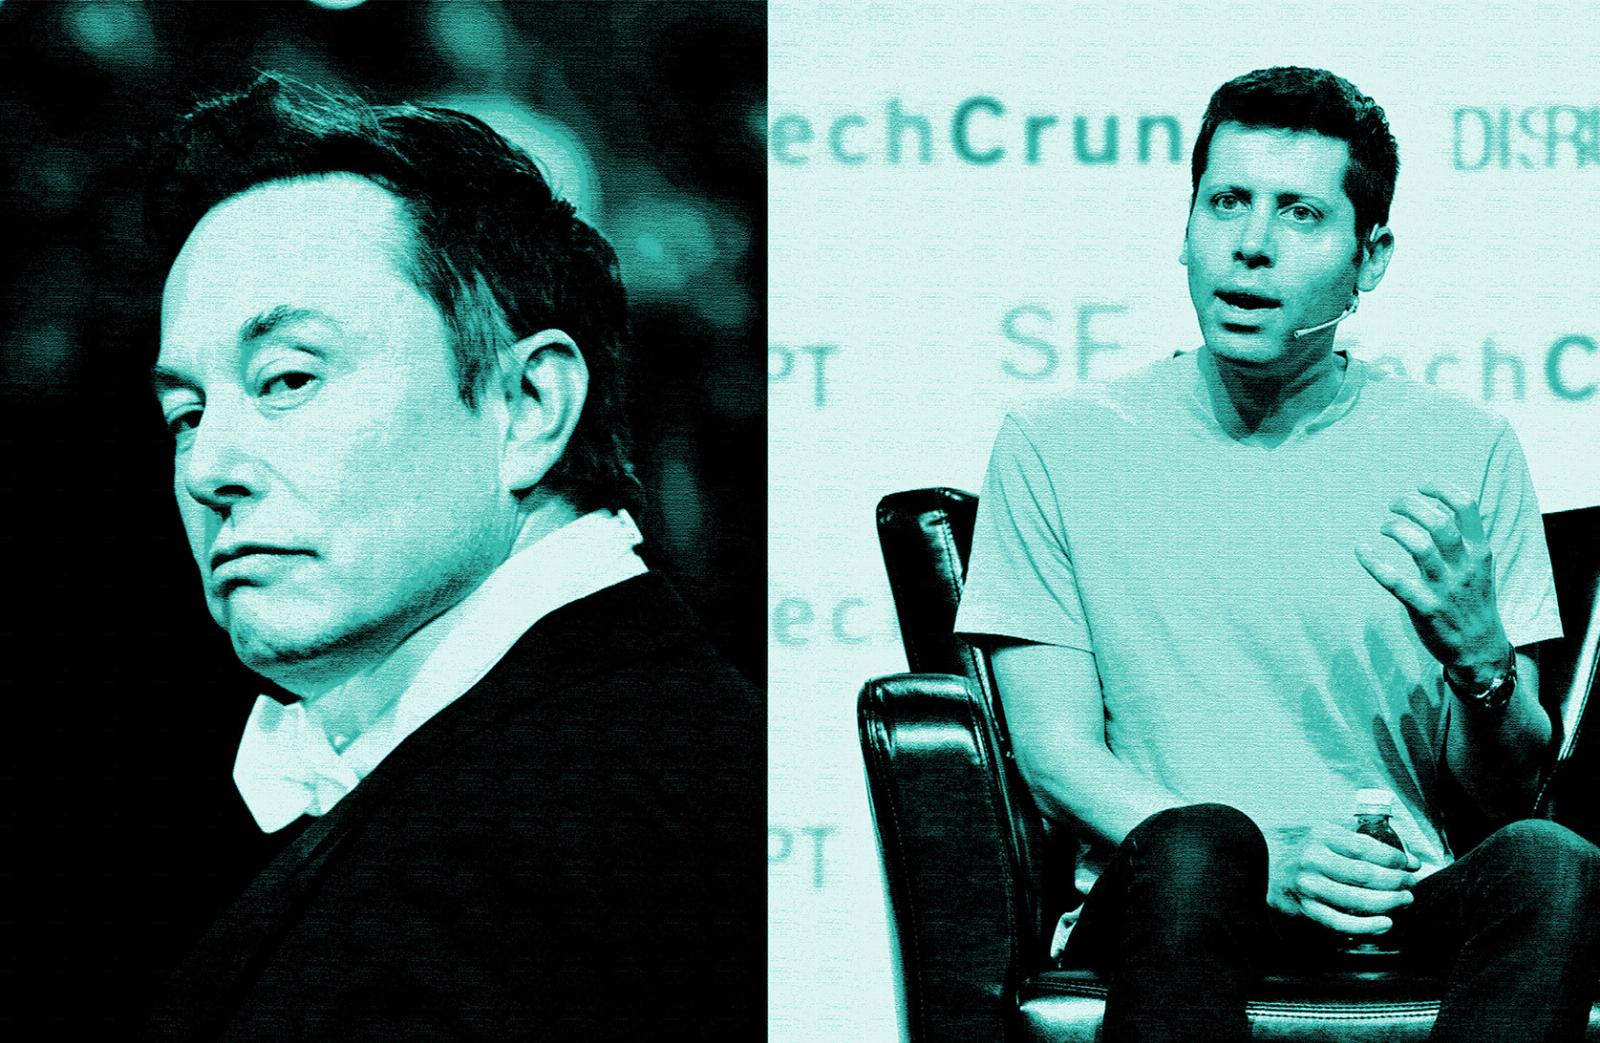 Elon Musk used to say he put $100M in OpenAI, but now it’s $50M: Here are the receipts